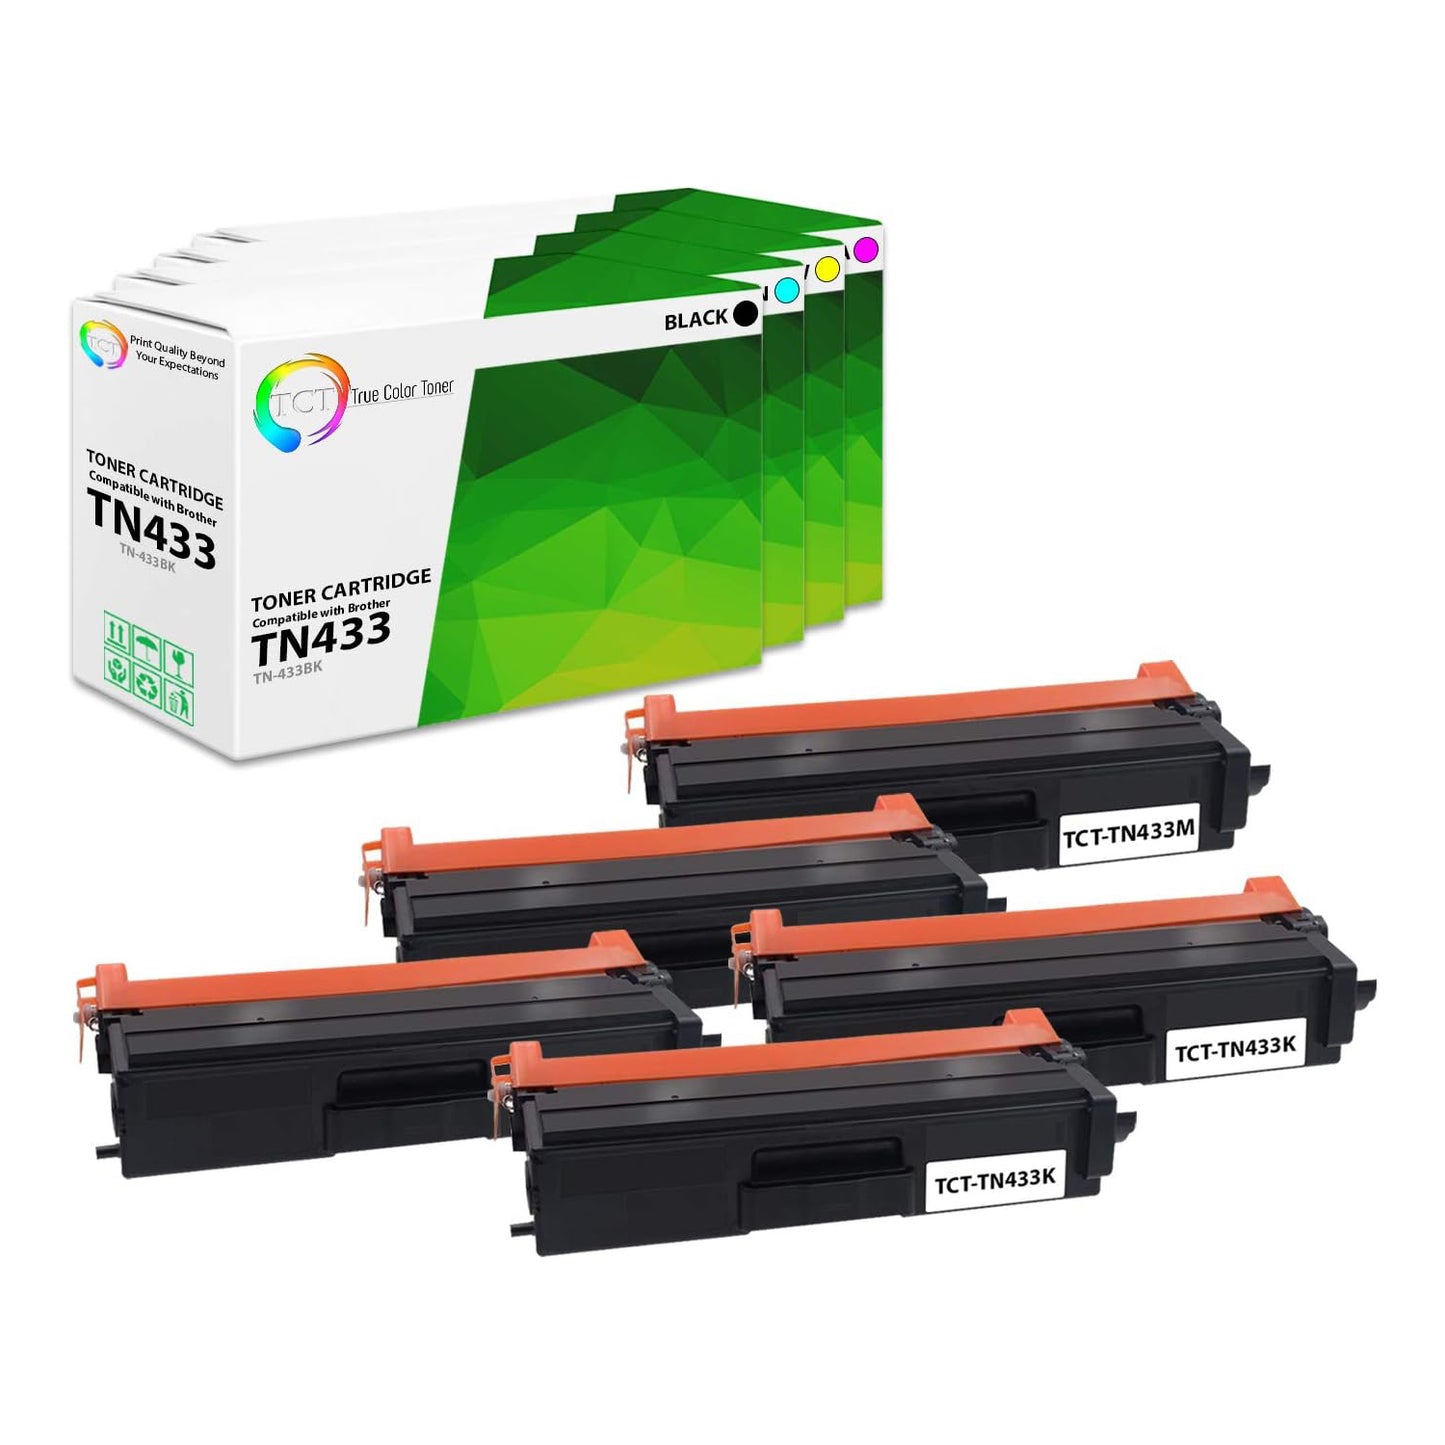 TCT Compatible HY Toner Cartridge Replacement for the Brother TN433 Series - 5 Pack (BK, C, M, Y)